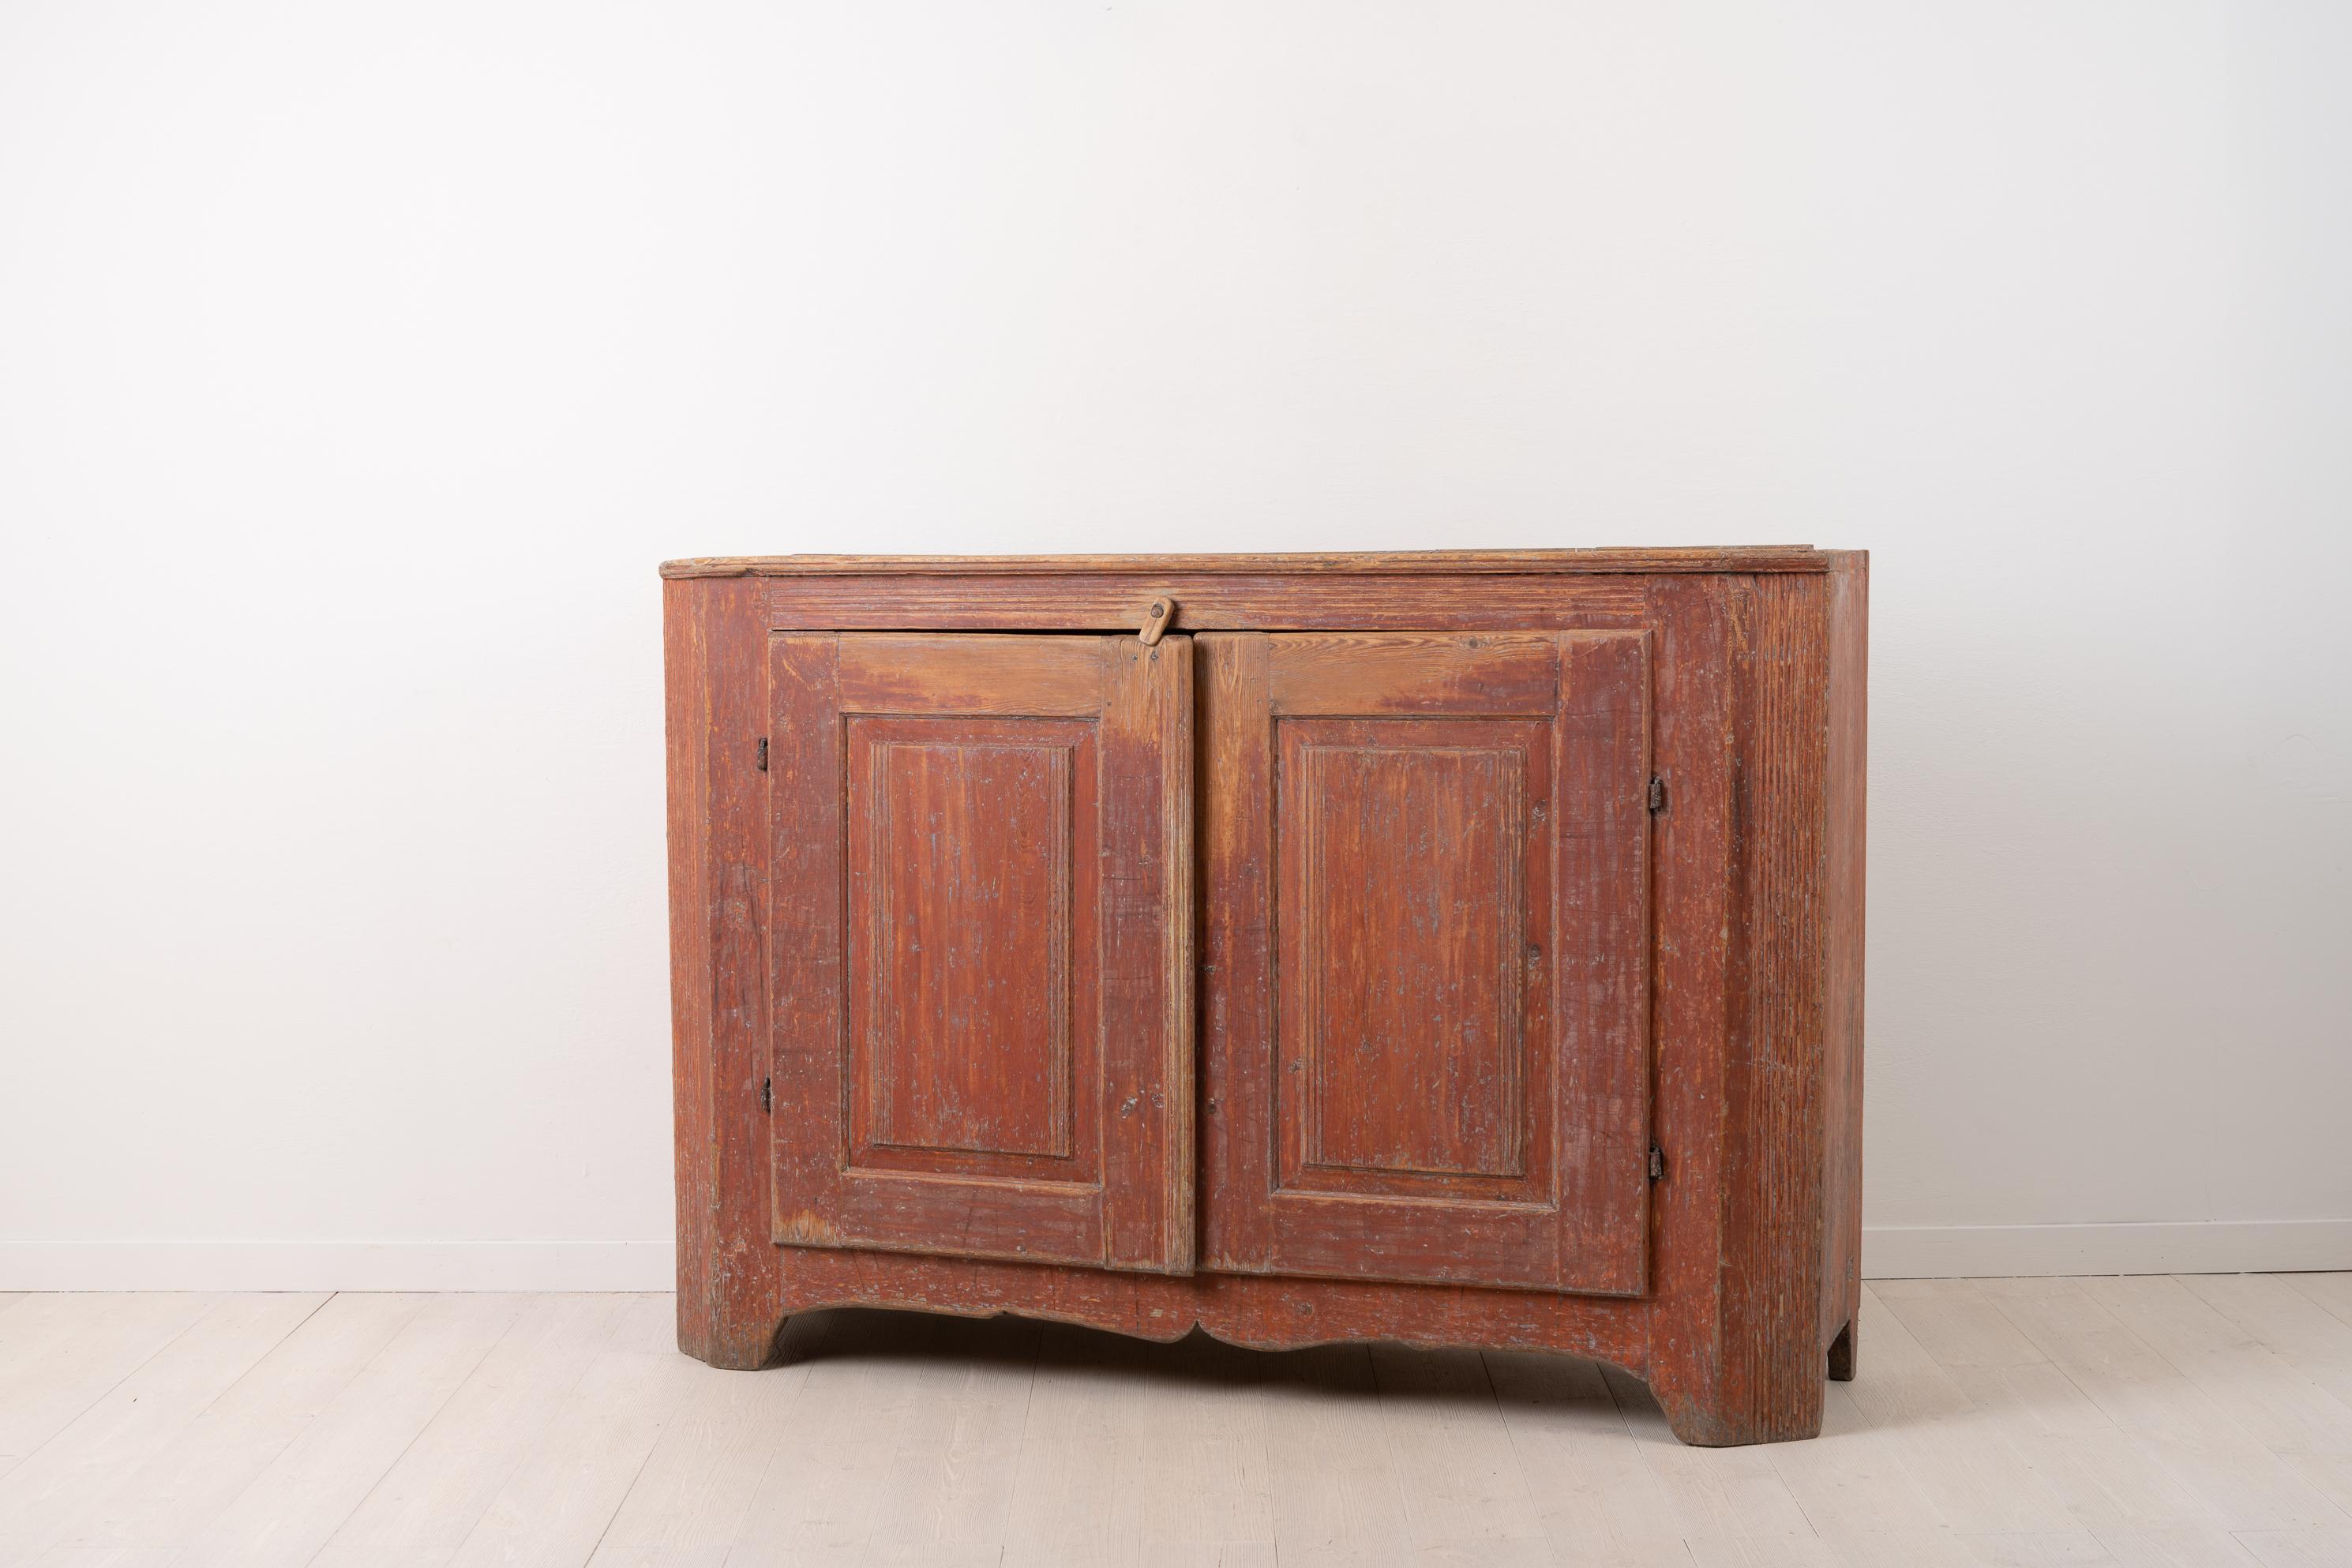 18th Century Swedish Neoclassical Sideboard with Rococo Details